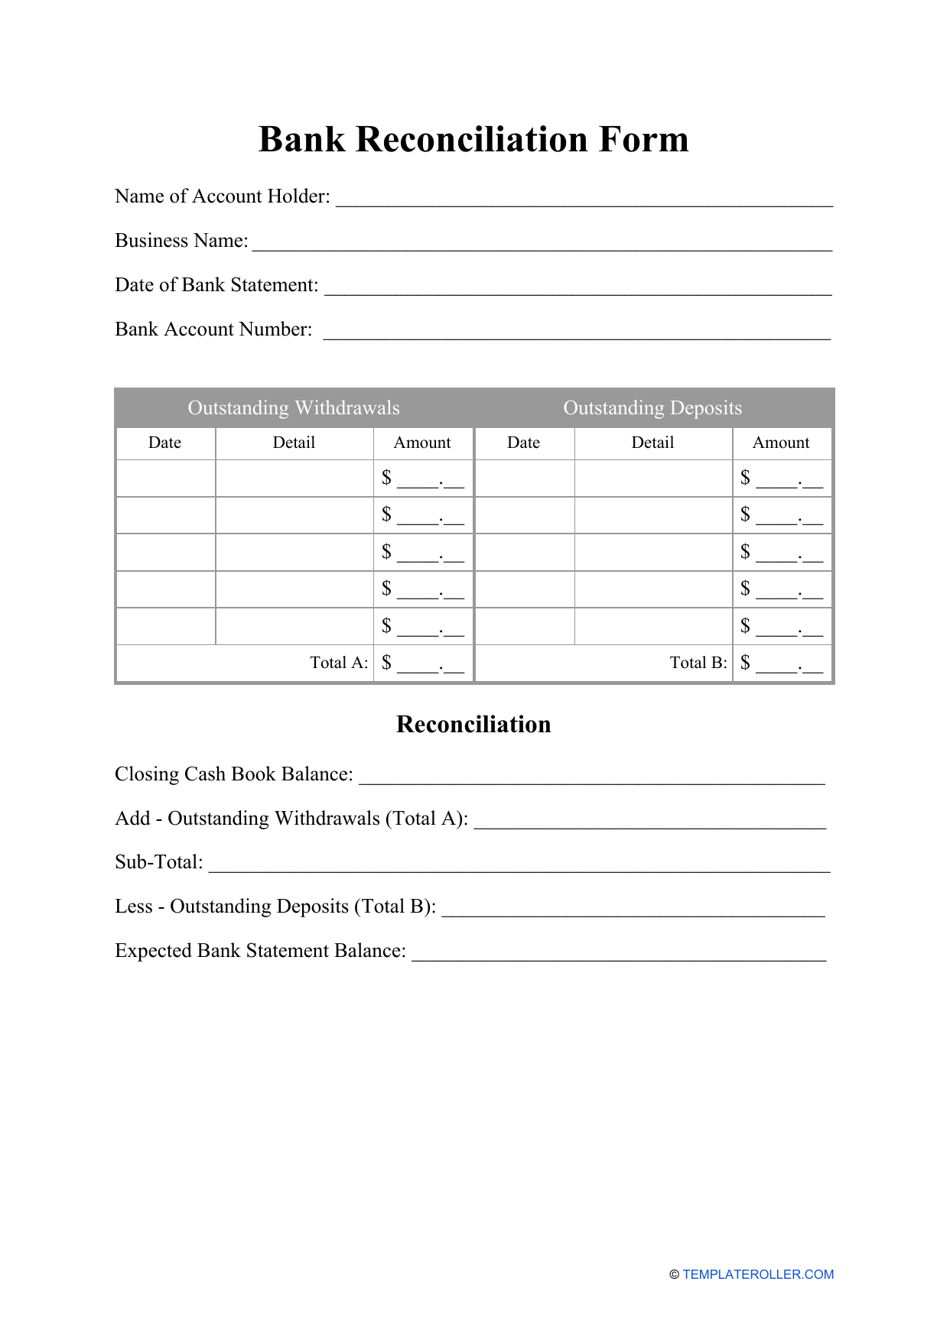 Bank Reconciliation Form Download Printable PDF  Templateroller Throughout Reconciling A Bank Statement Worksheet